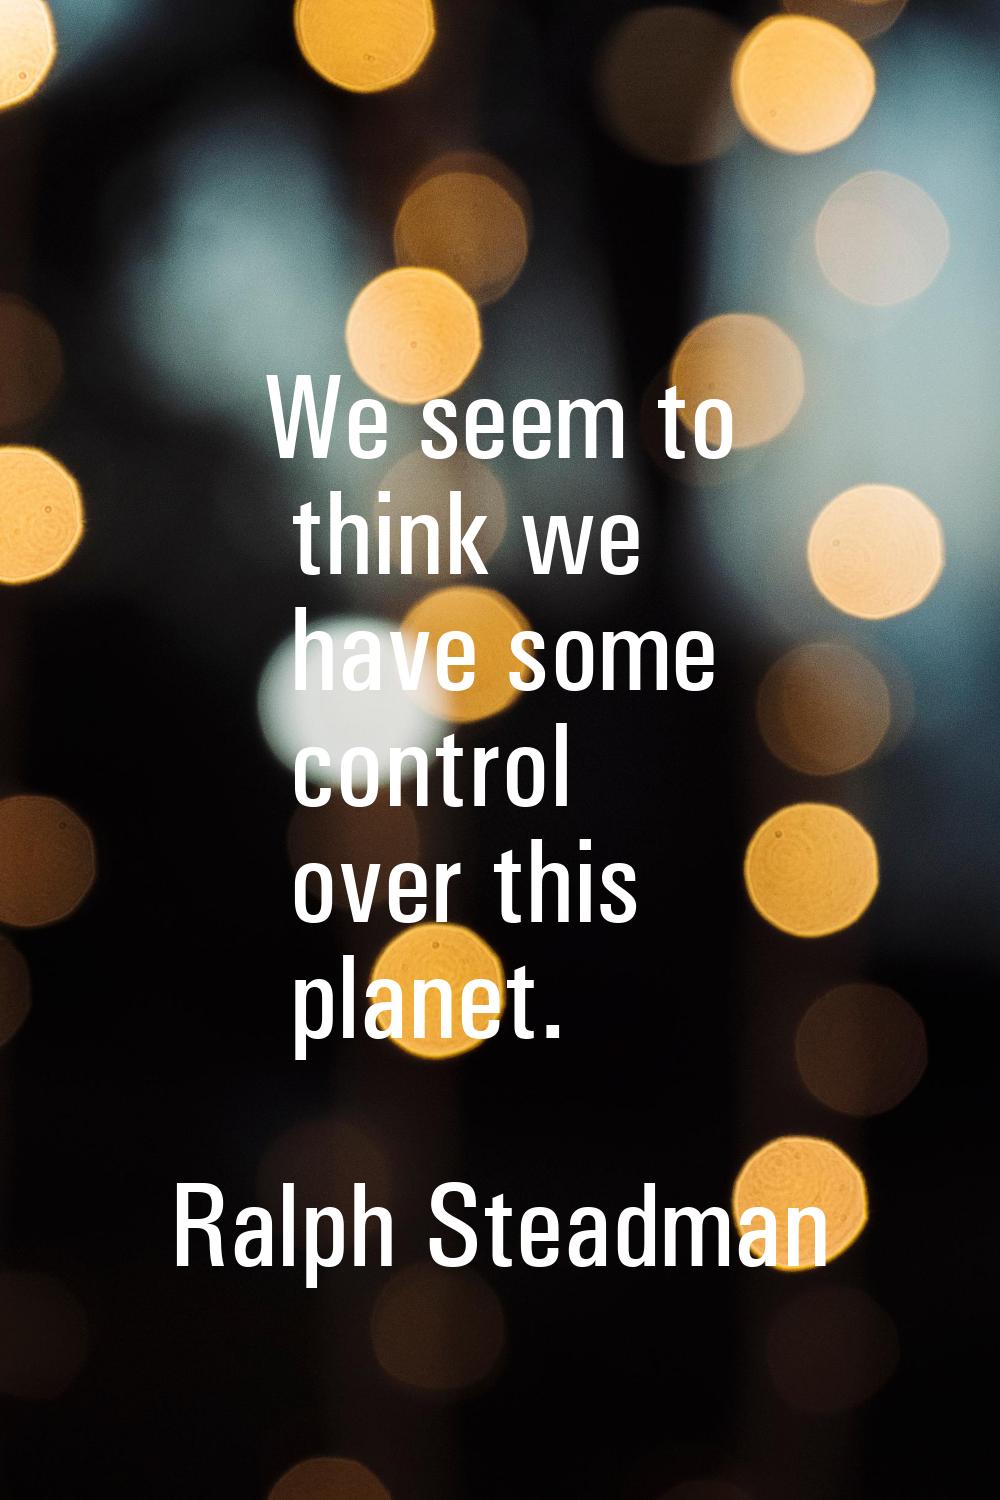 We seem to think we have some control over this planet.